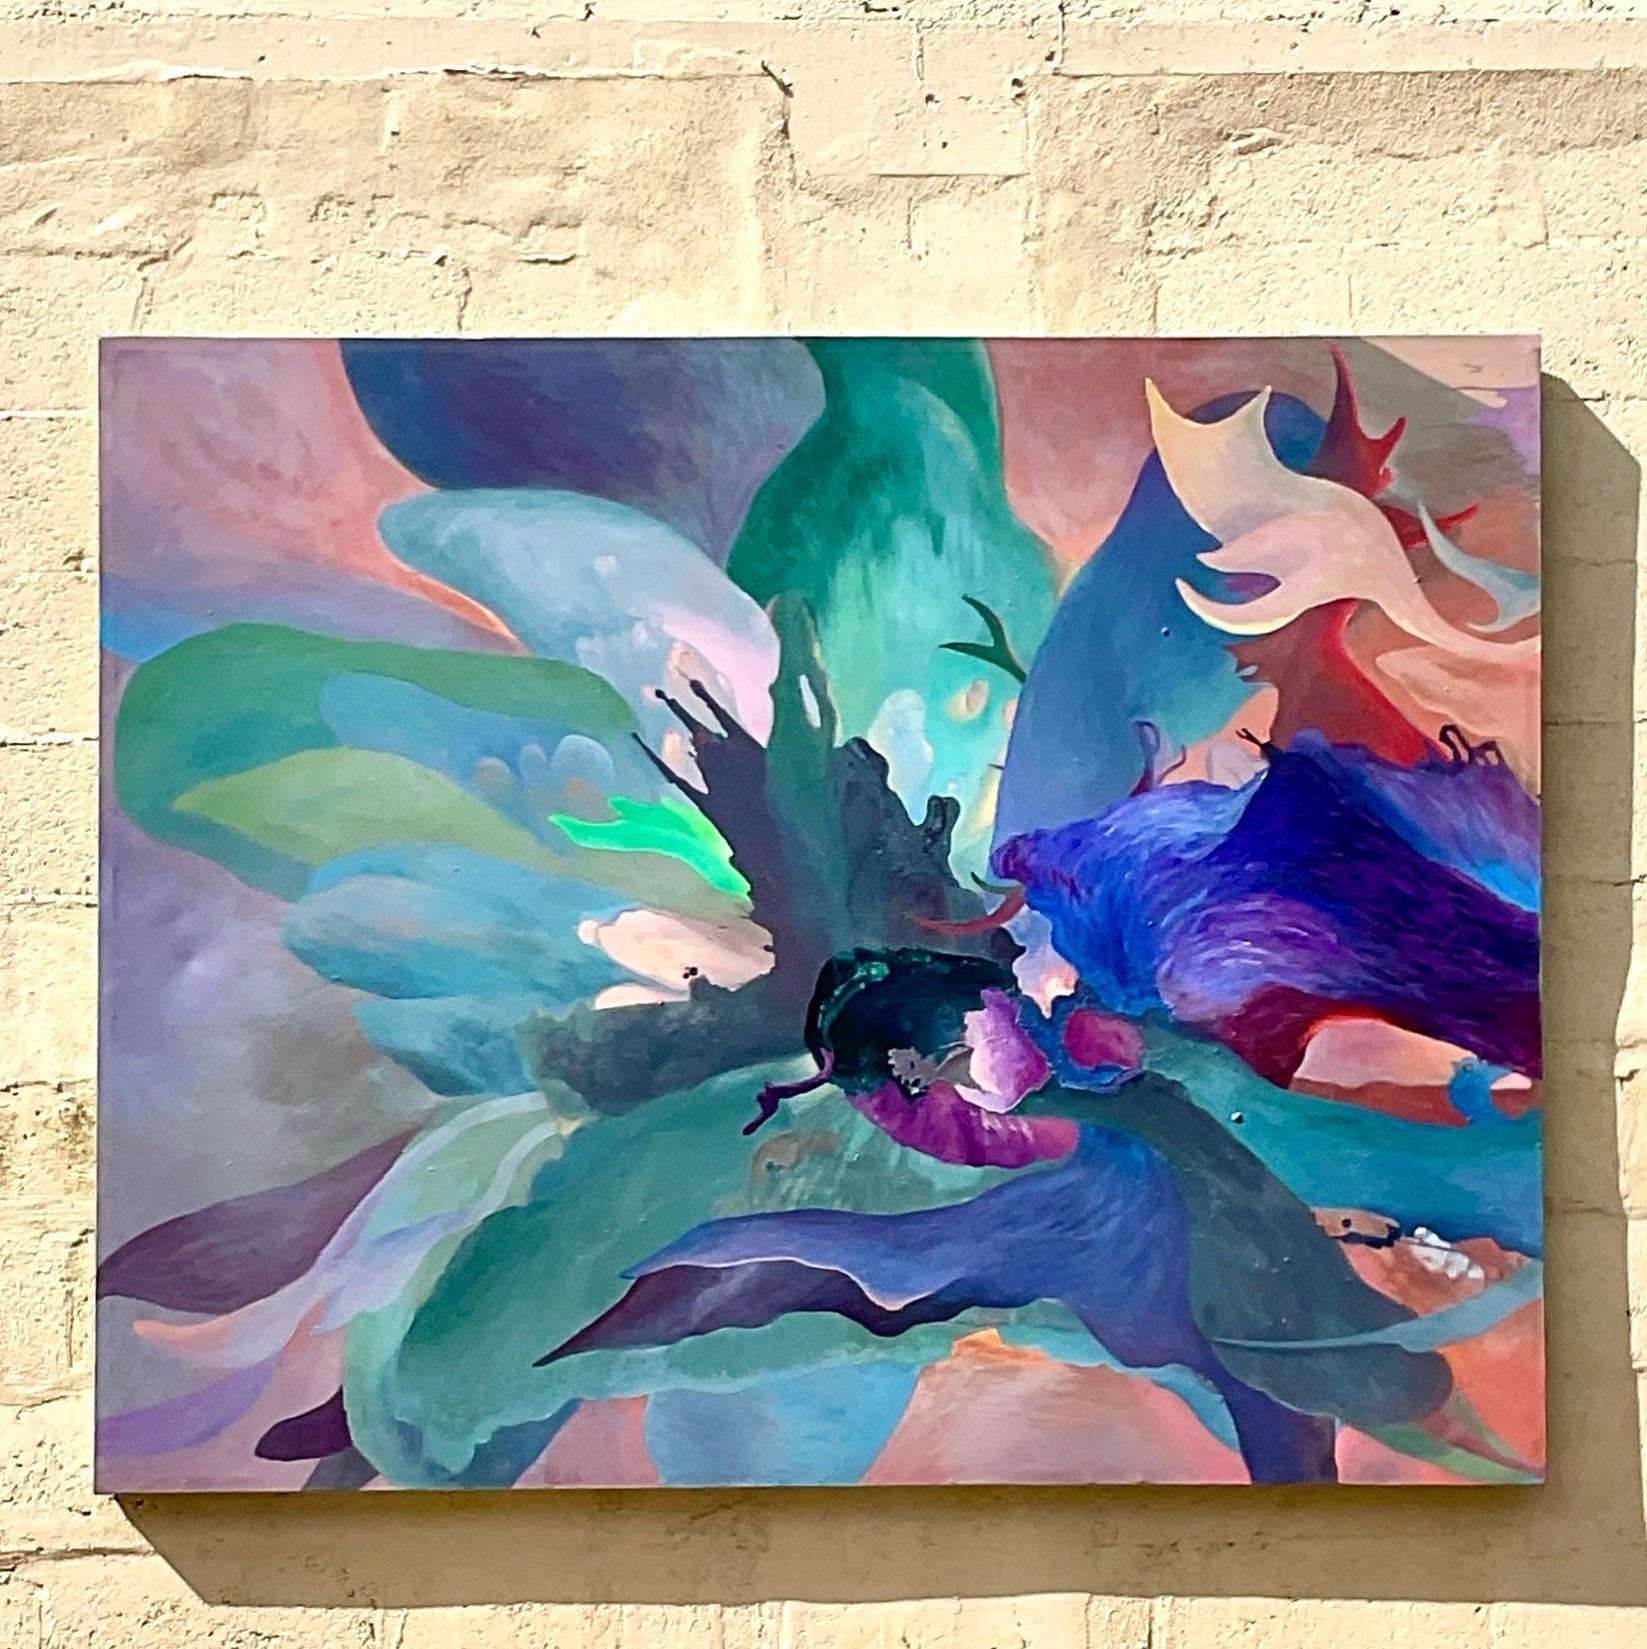 A stunning composition by Vietnamese artist Tin Ly. A brilliant abstract with a stunning display of brush strokes on canvas. The use of blues, greens, lavenders and orange in the work creates a painting that is both soothing and exciting. This piece